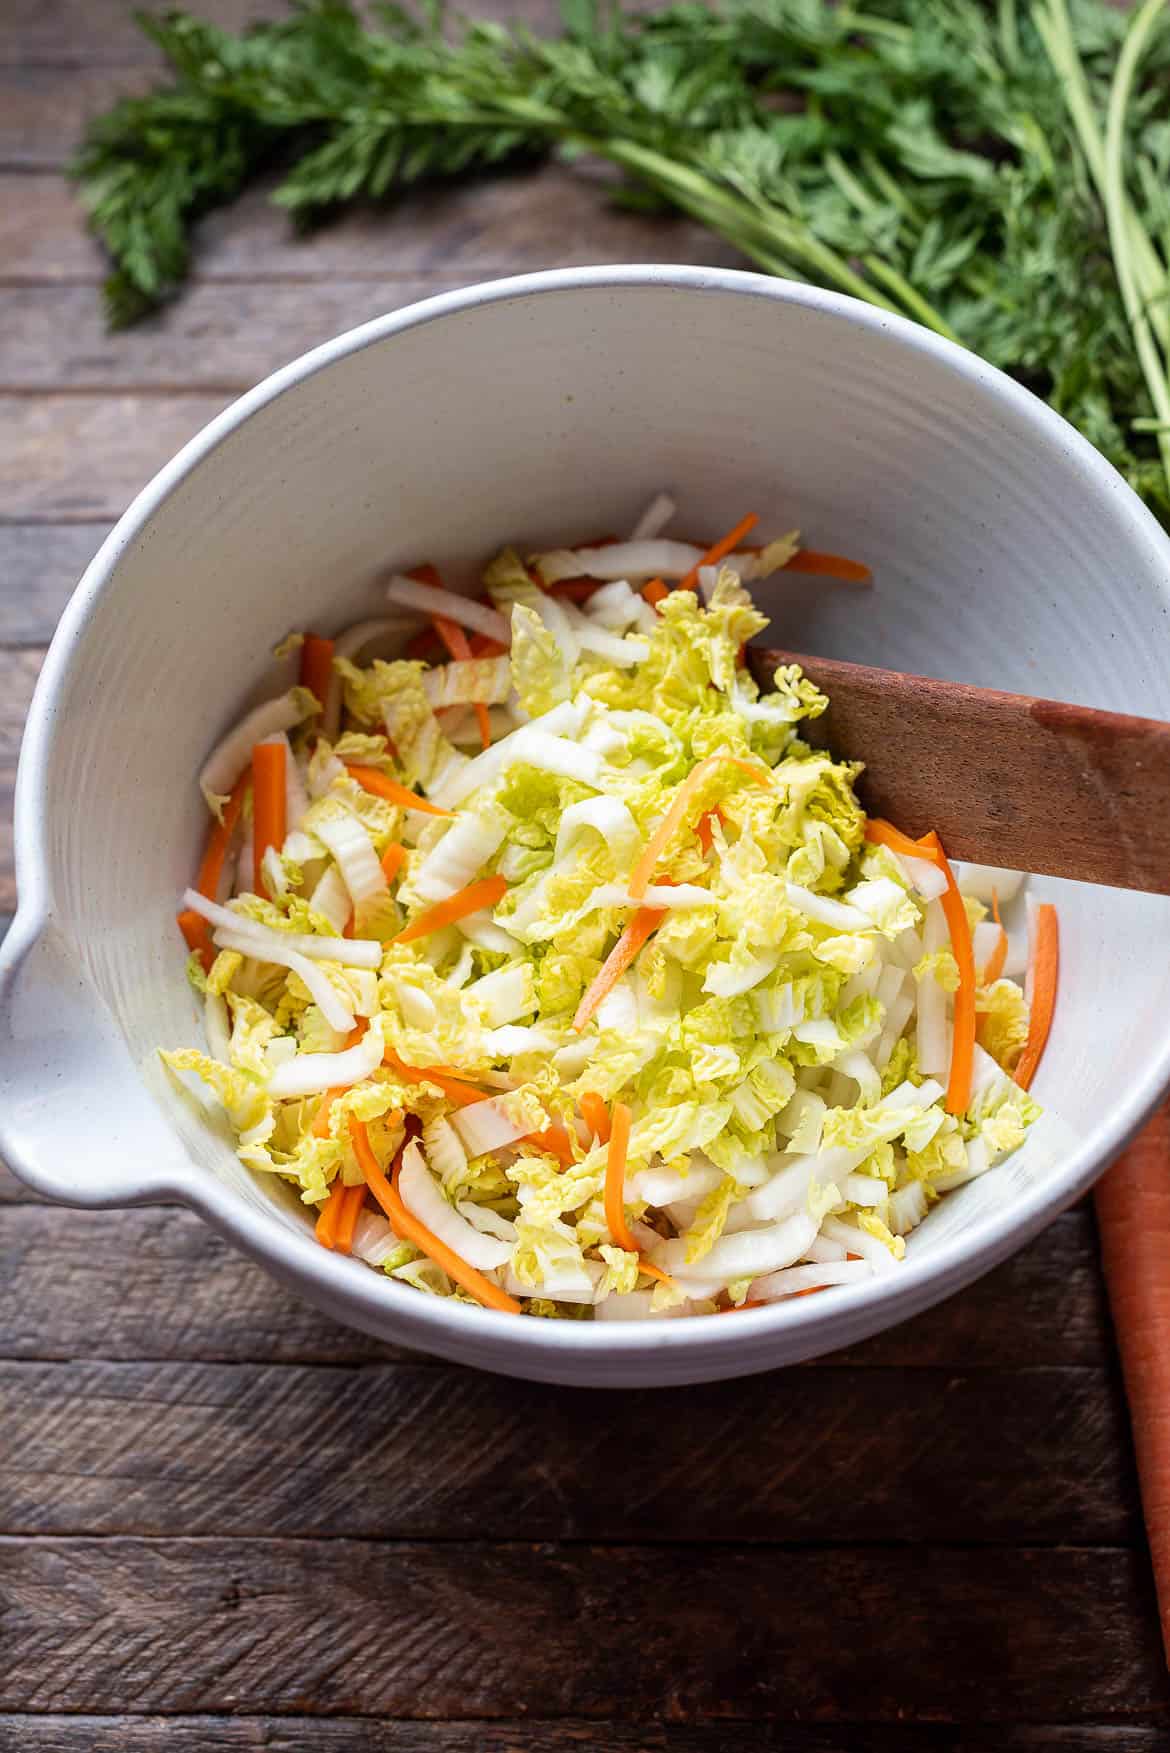 Shredded napa cabbage and carrots in a mixing bowl.